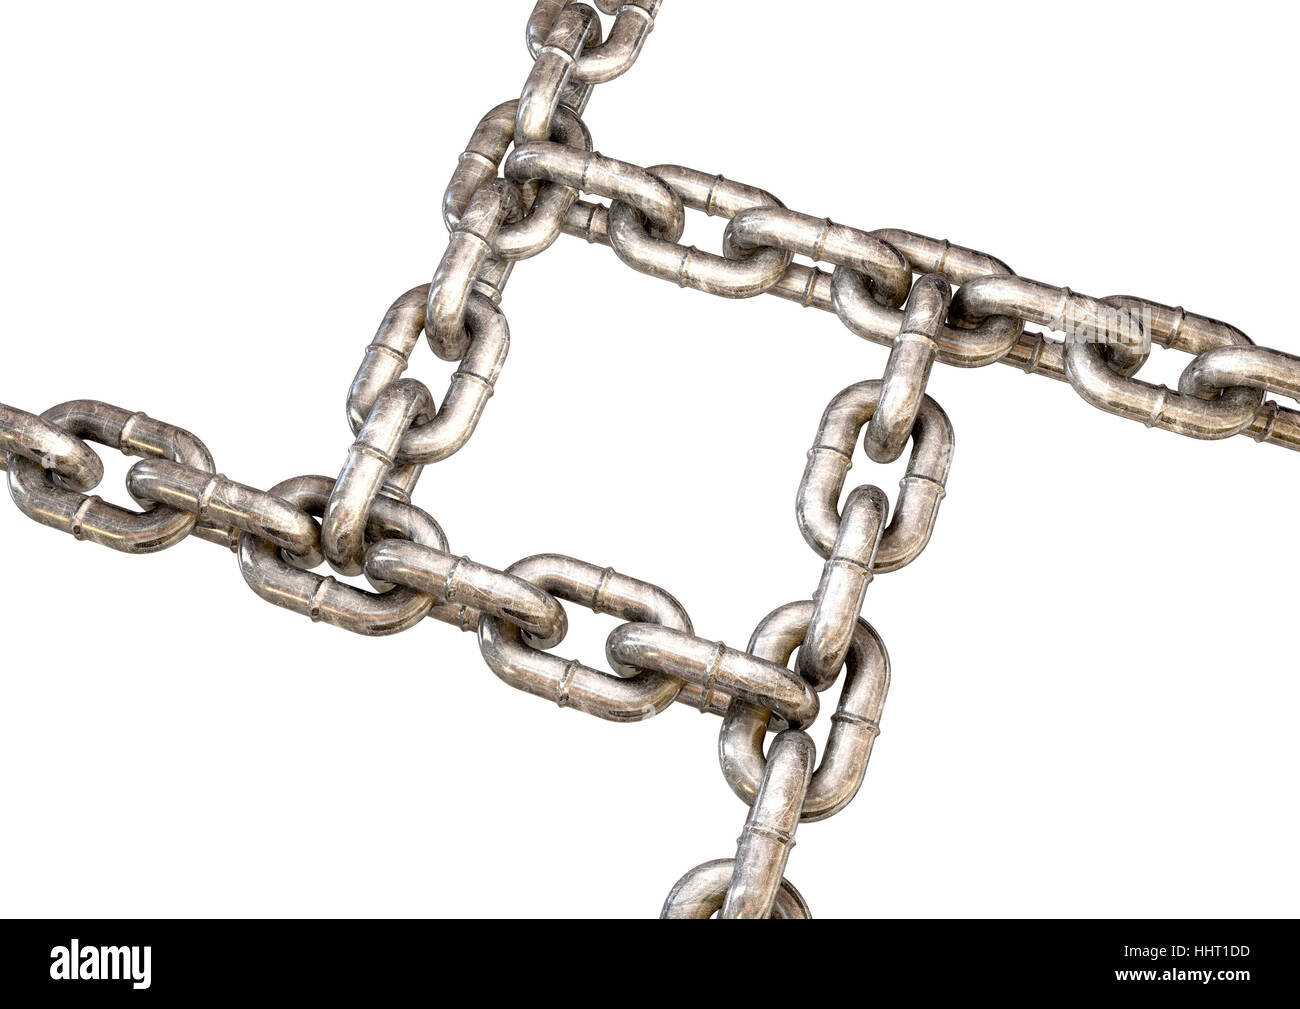 tools, isolated, connected, chain, metal, cast iron, connections, worn  Stock Photo - Alamy